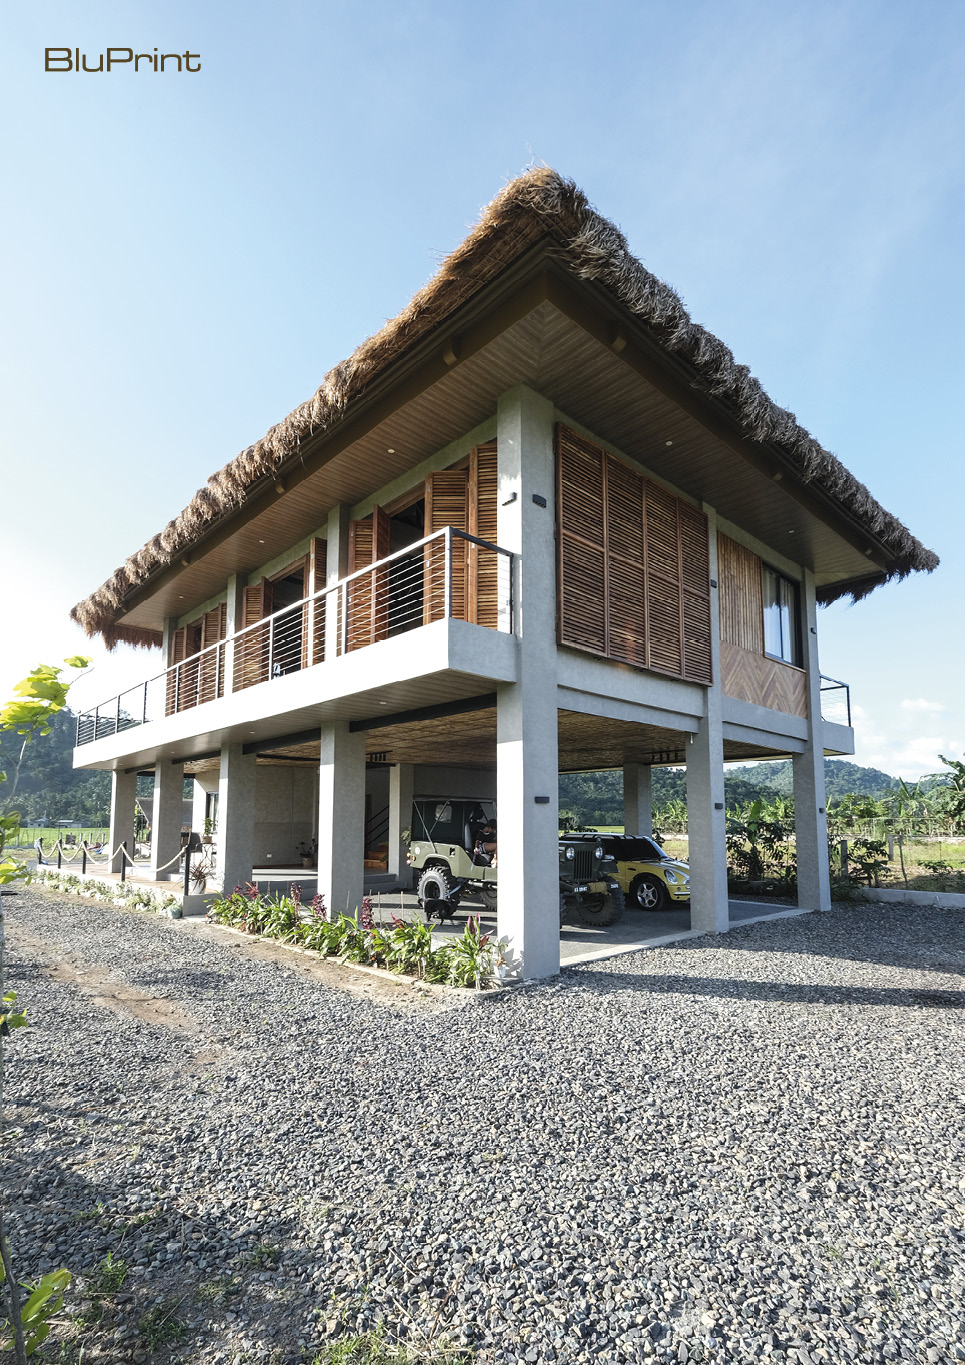 A street level view of a modern bahay kubo with concrete stilts and thatched roof.